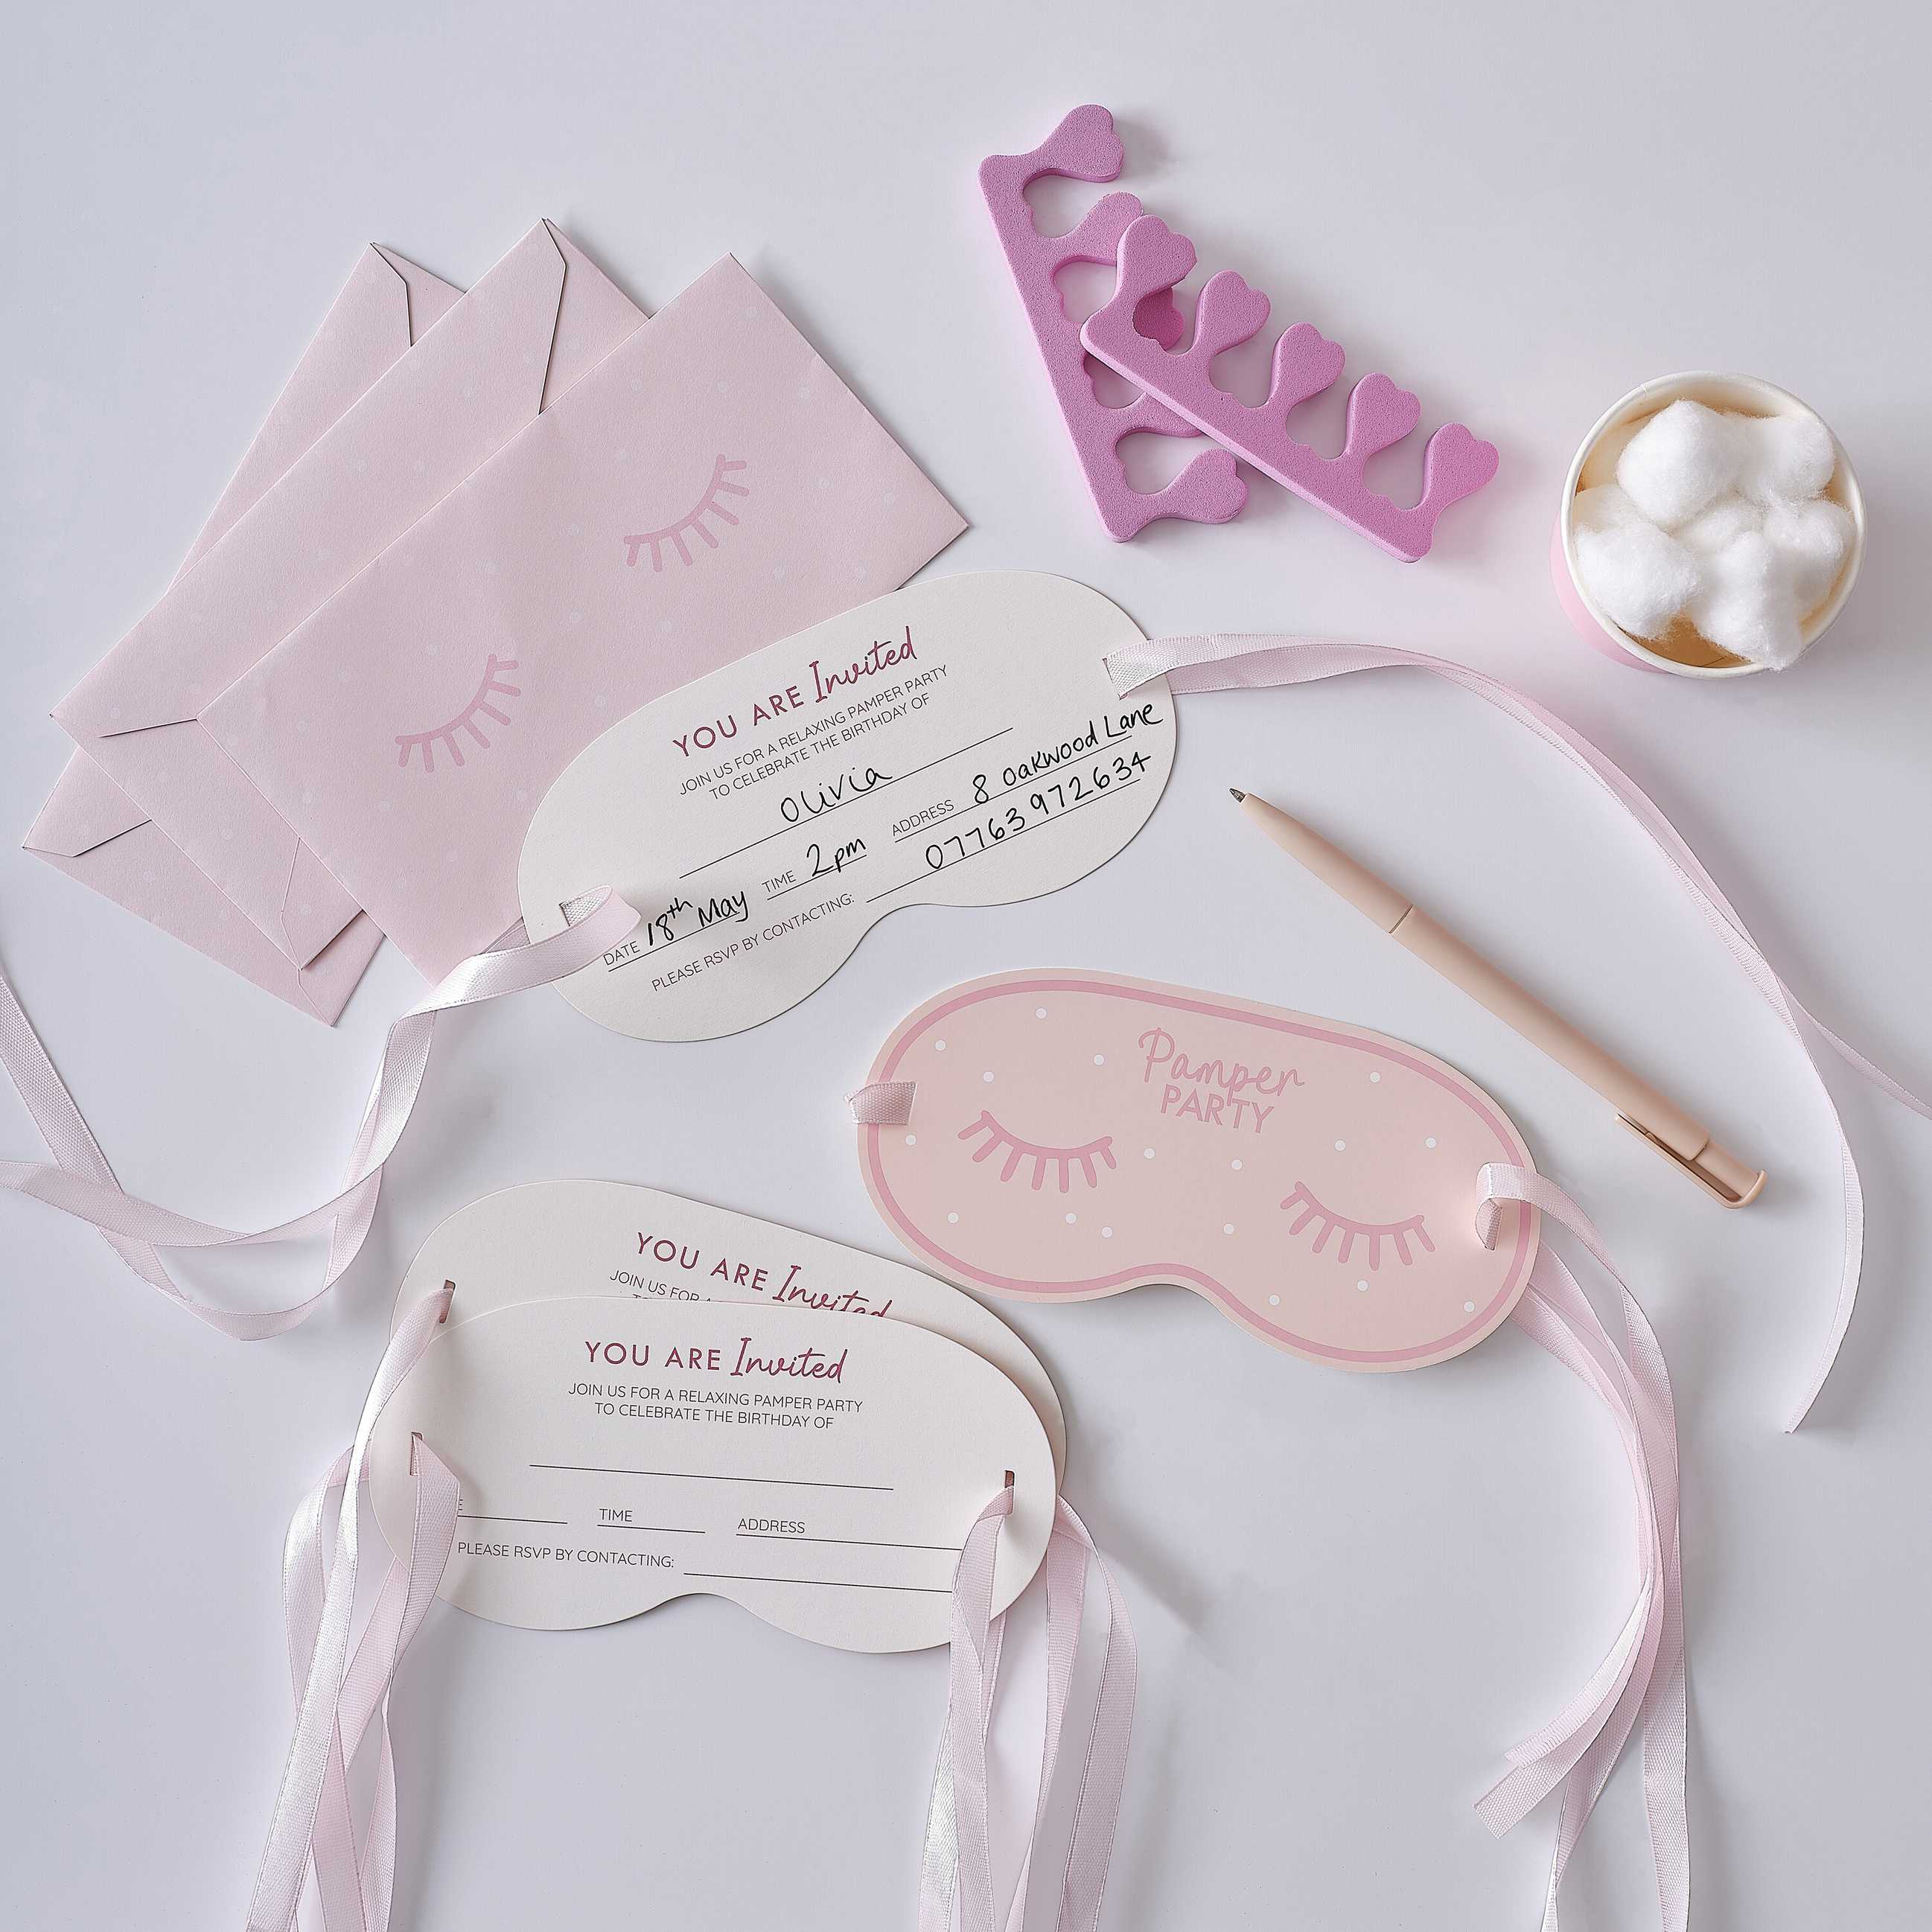 Pamper Party Invitations